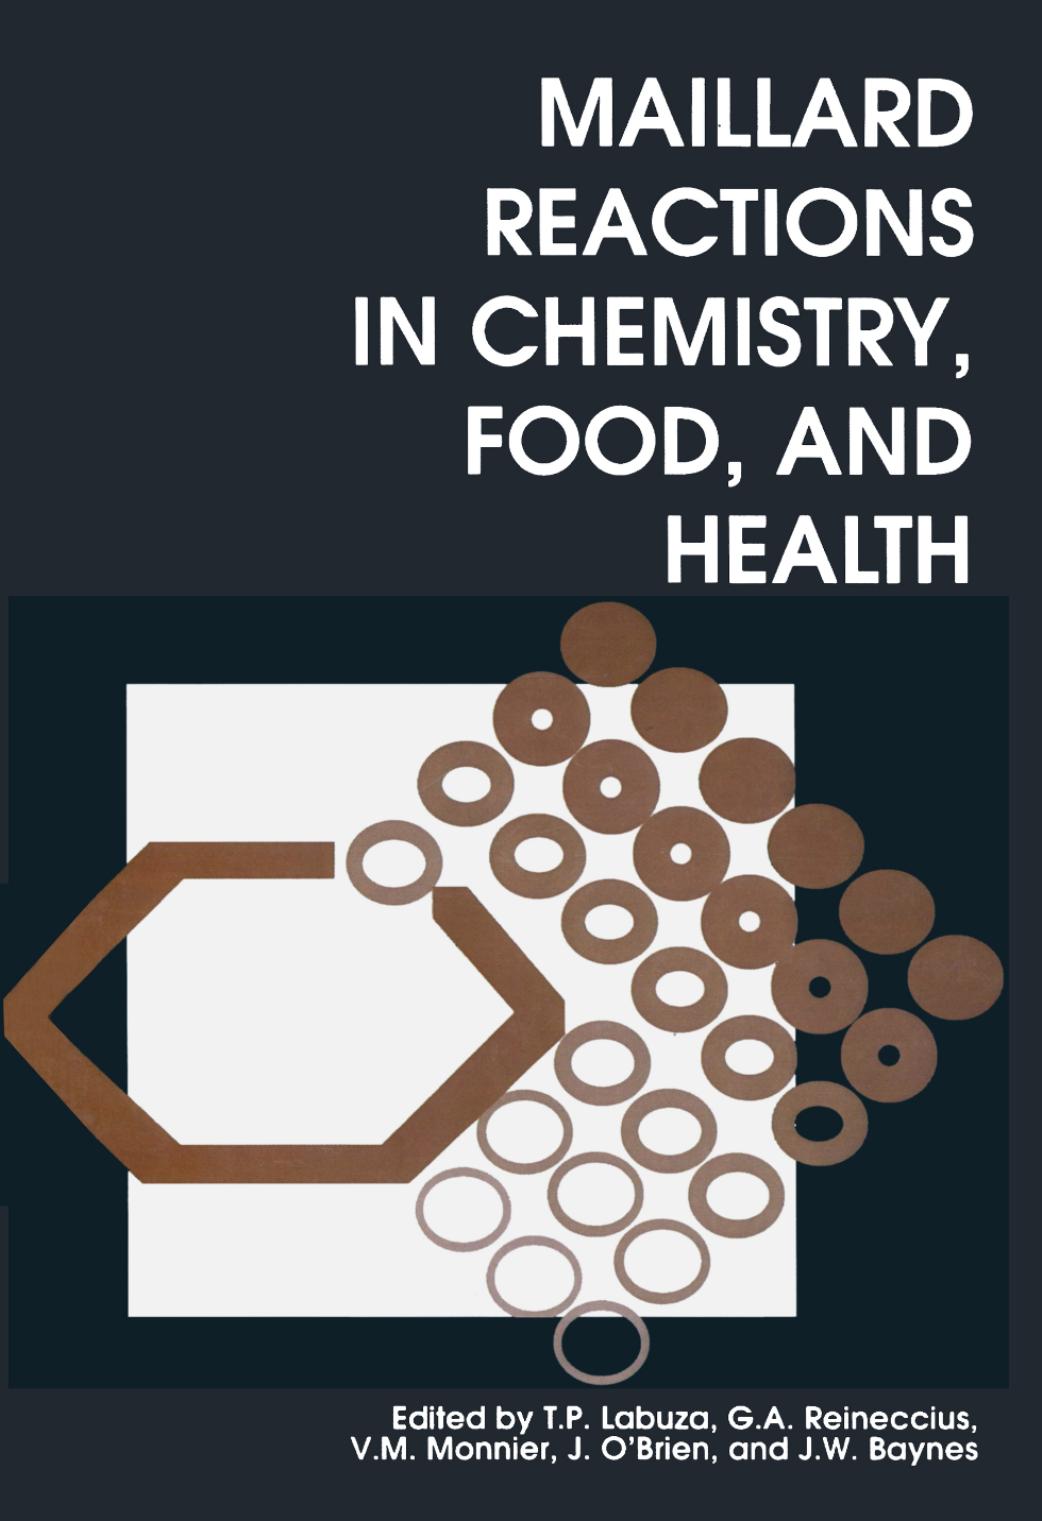 Maillard Reactions in Chemistry, Food and Health (Woodhead Publishing Series in Food Science, Technology and Nutrition)  2005